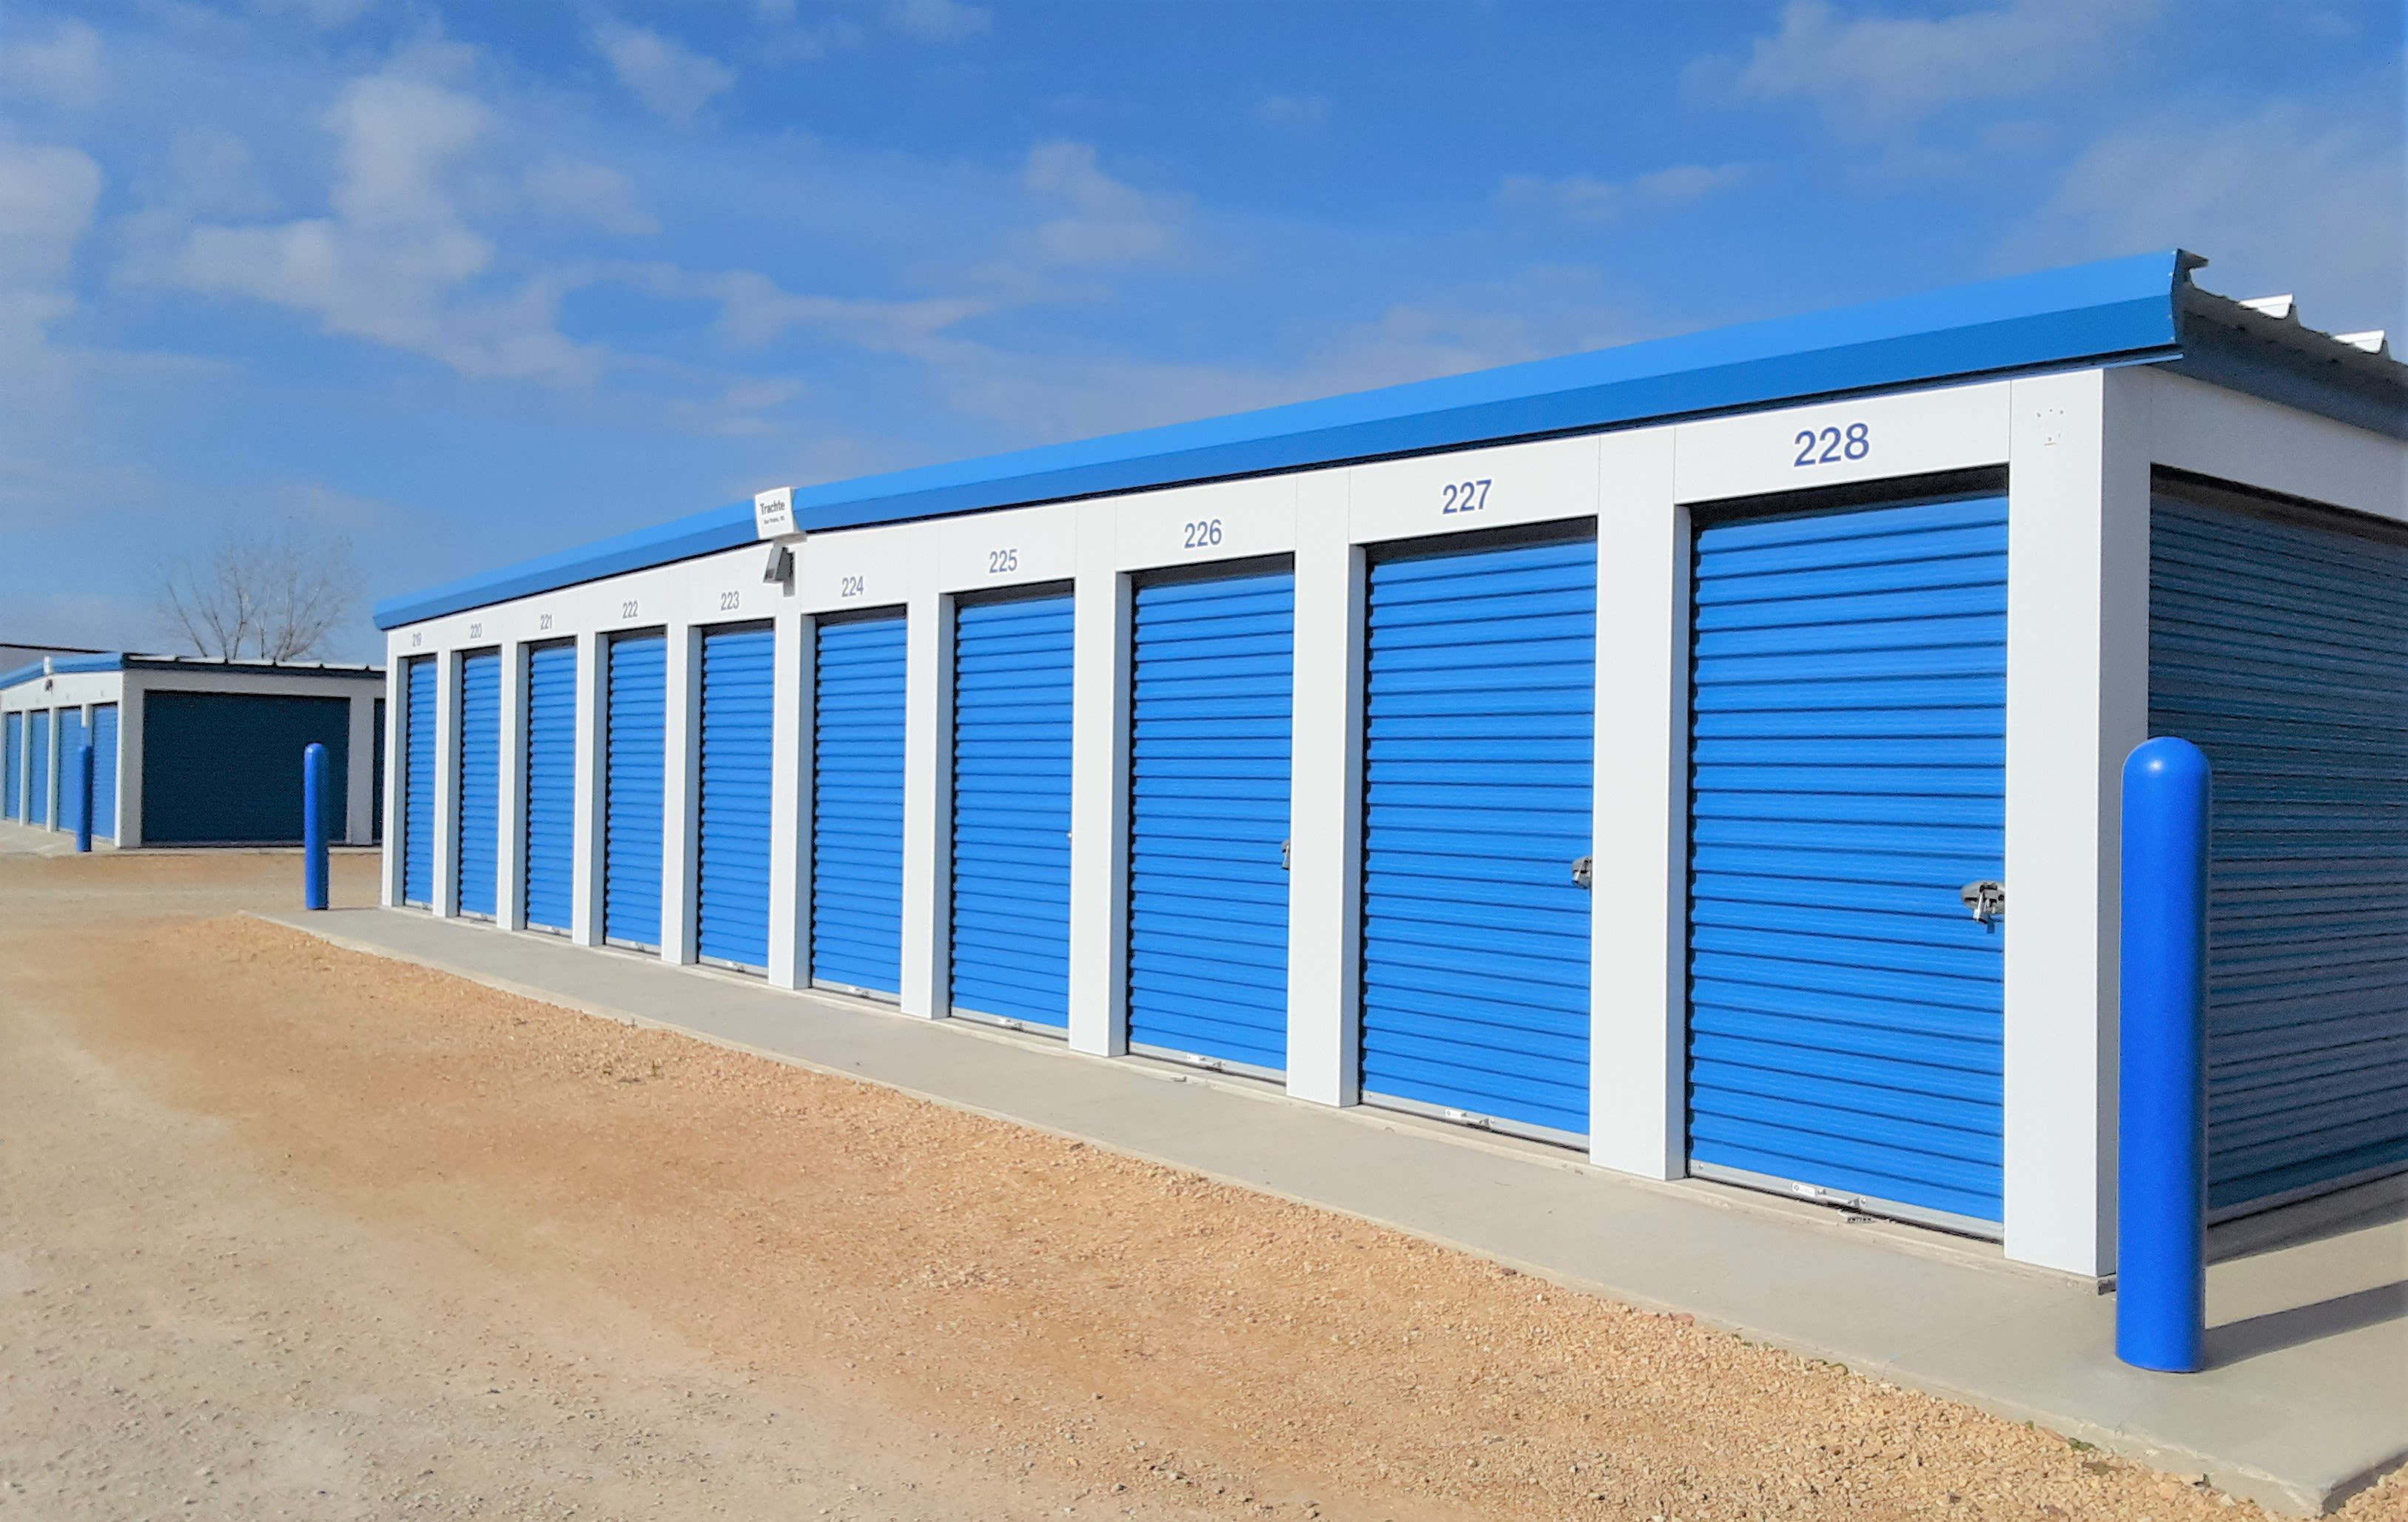 Storage units with blue doors at KO Storage of Waseca 15th Ave in Waseca, Minnesota